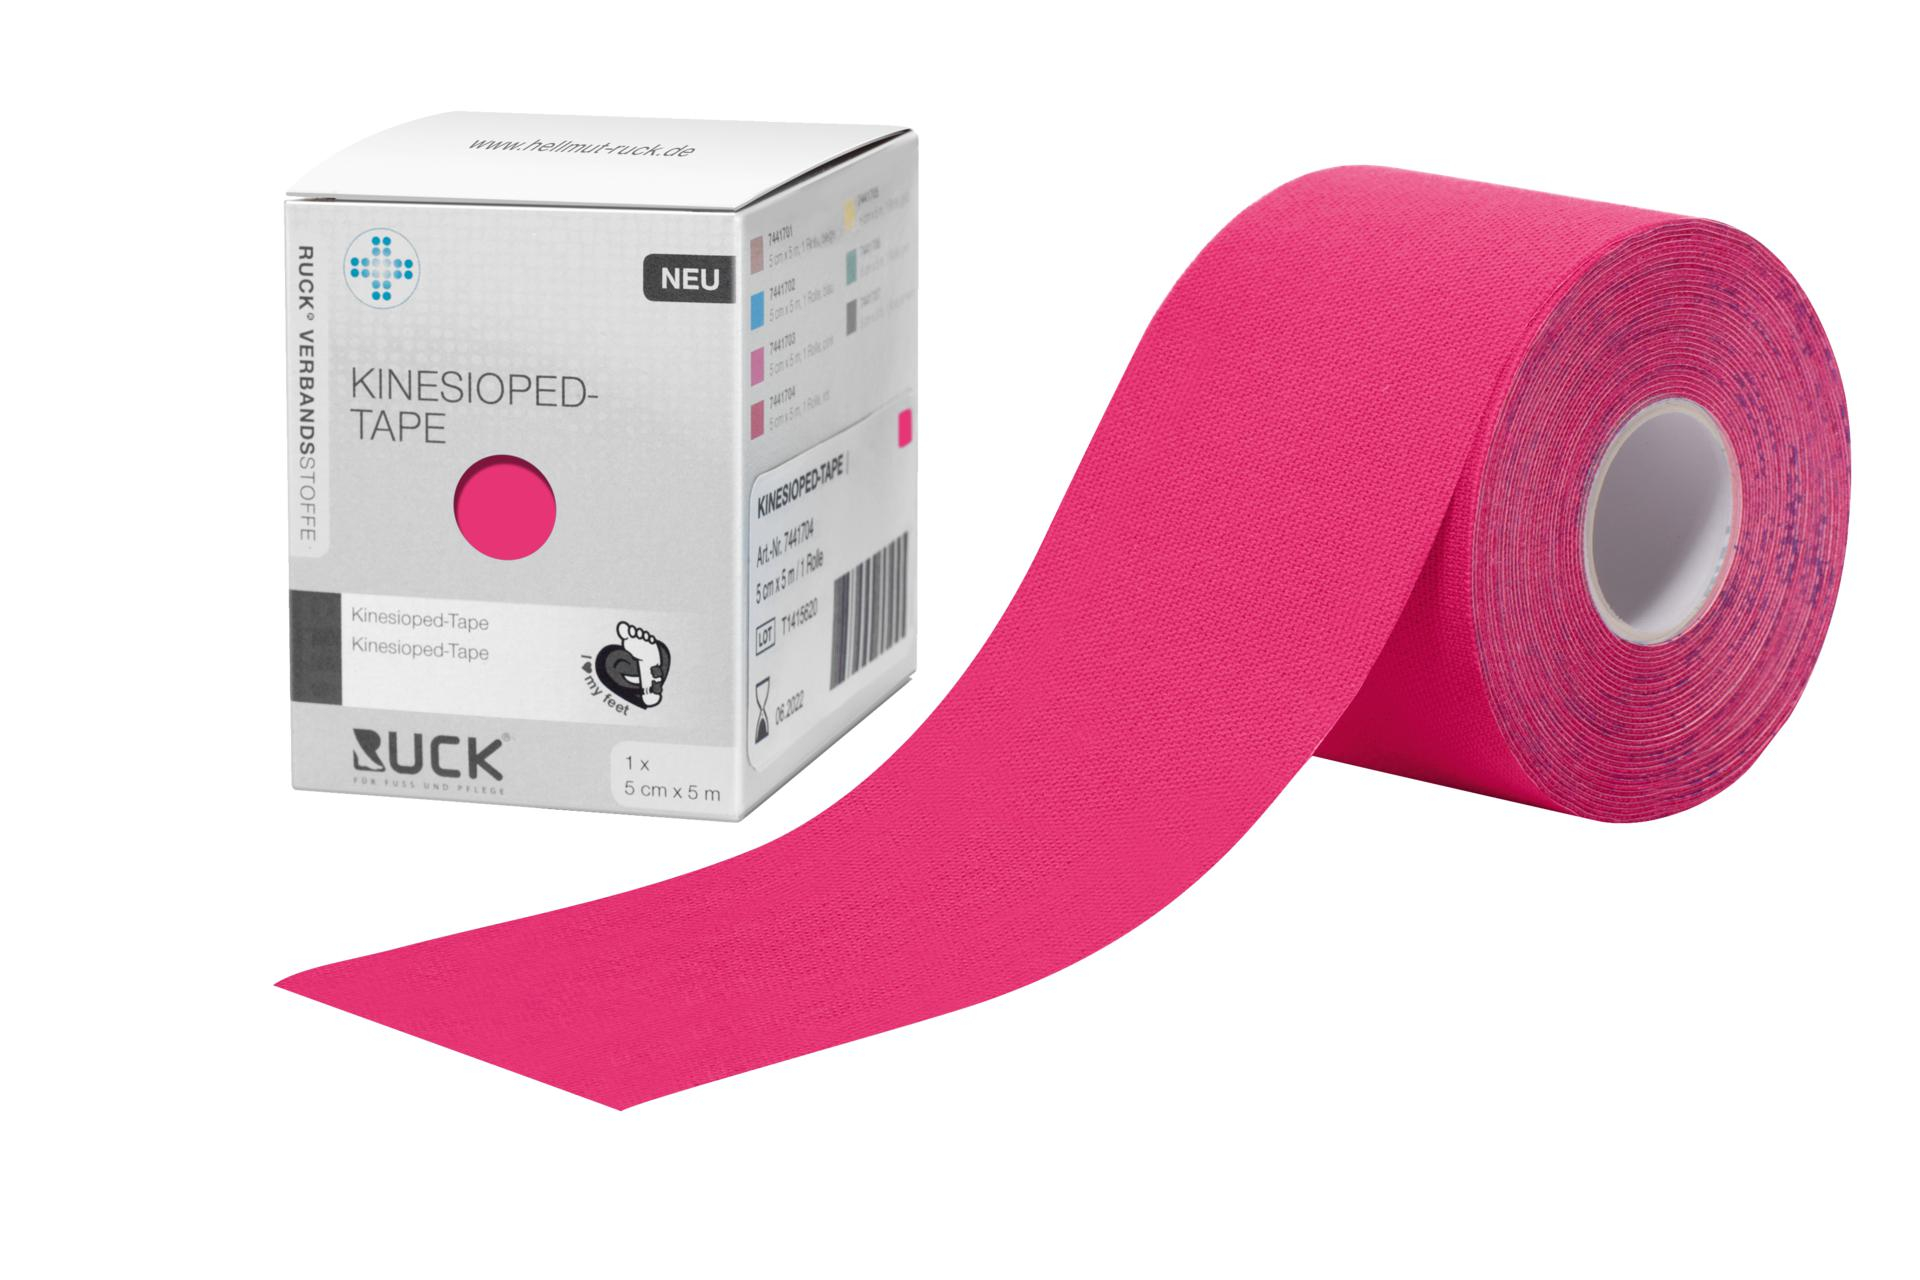 KINESIOPED-Tape 5 cm x 5 m, 1 Rolle pink